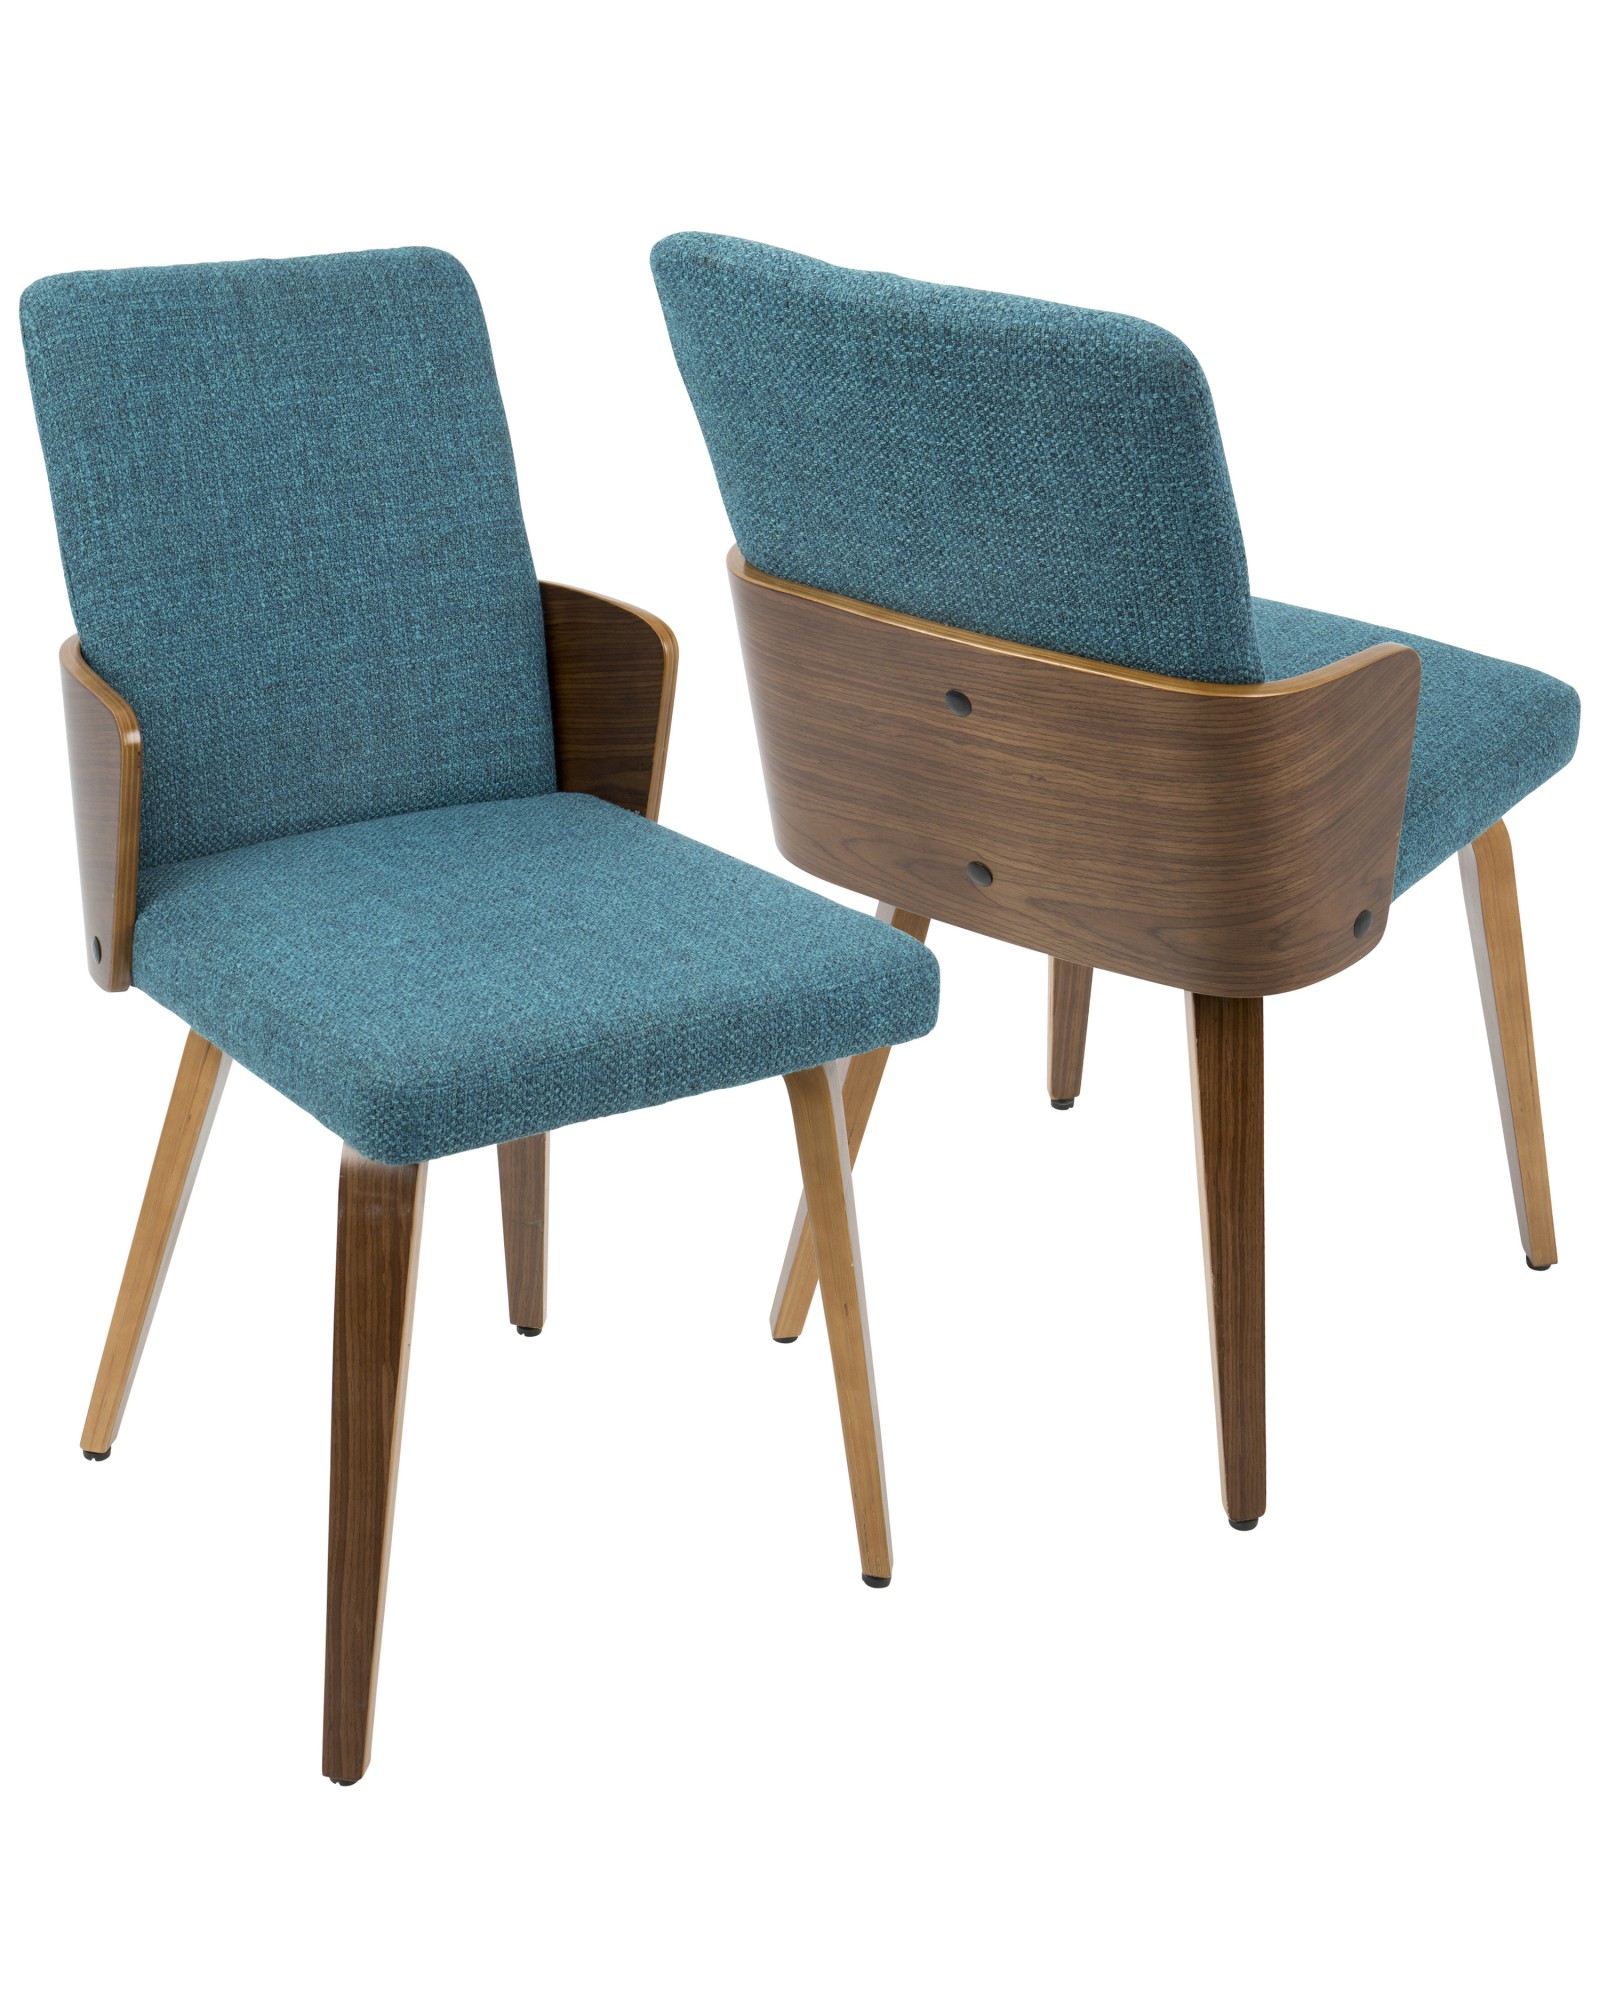 Carmella Mid-Century Modern Dining/Accent Chair in Walnut and Teal Fabric - Set of 2